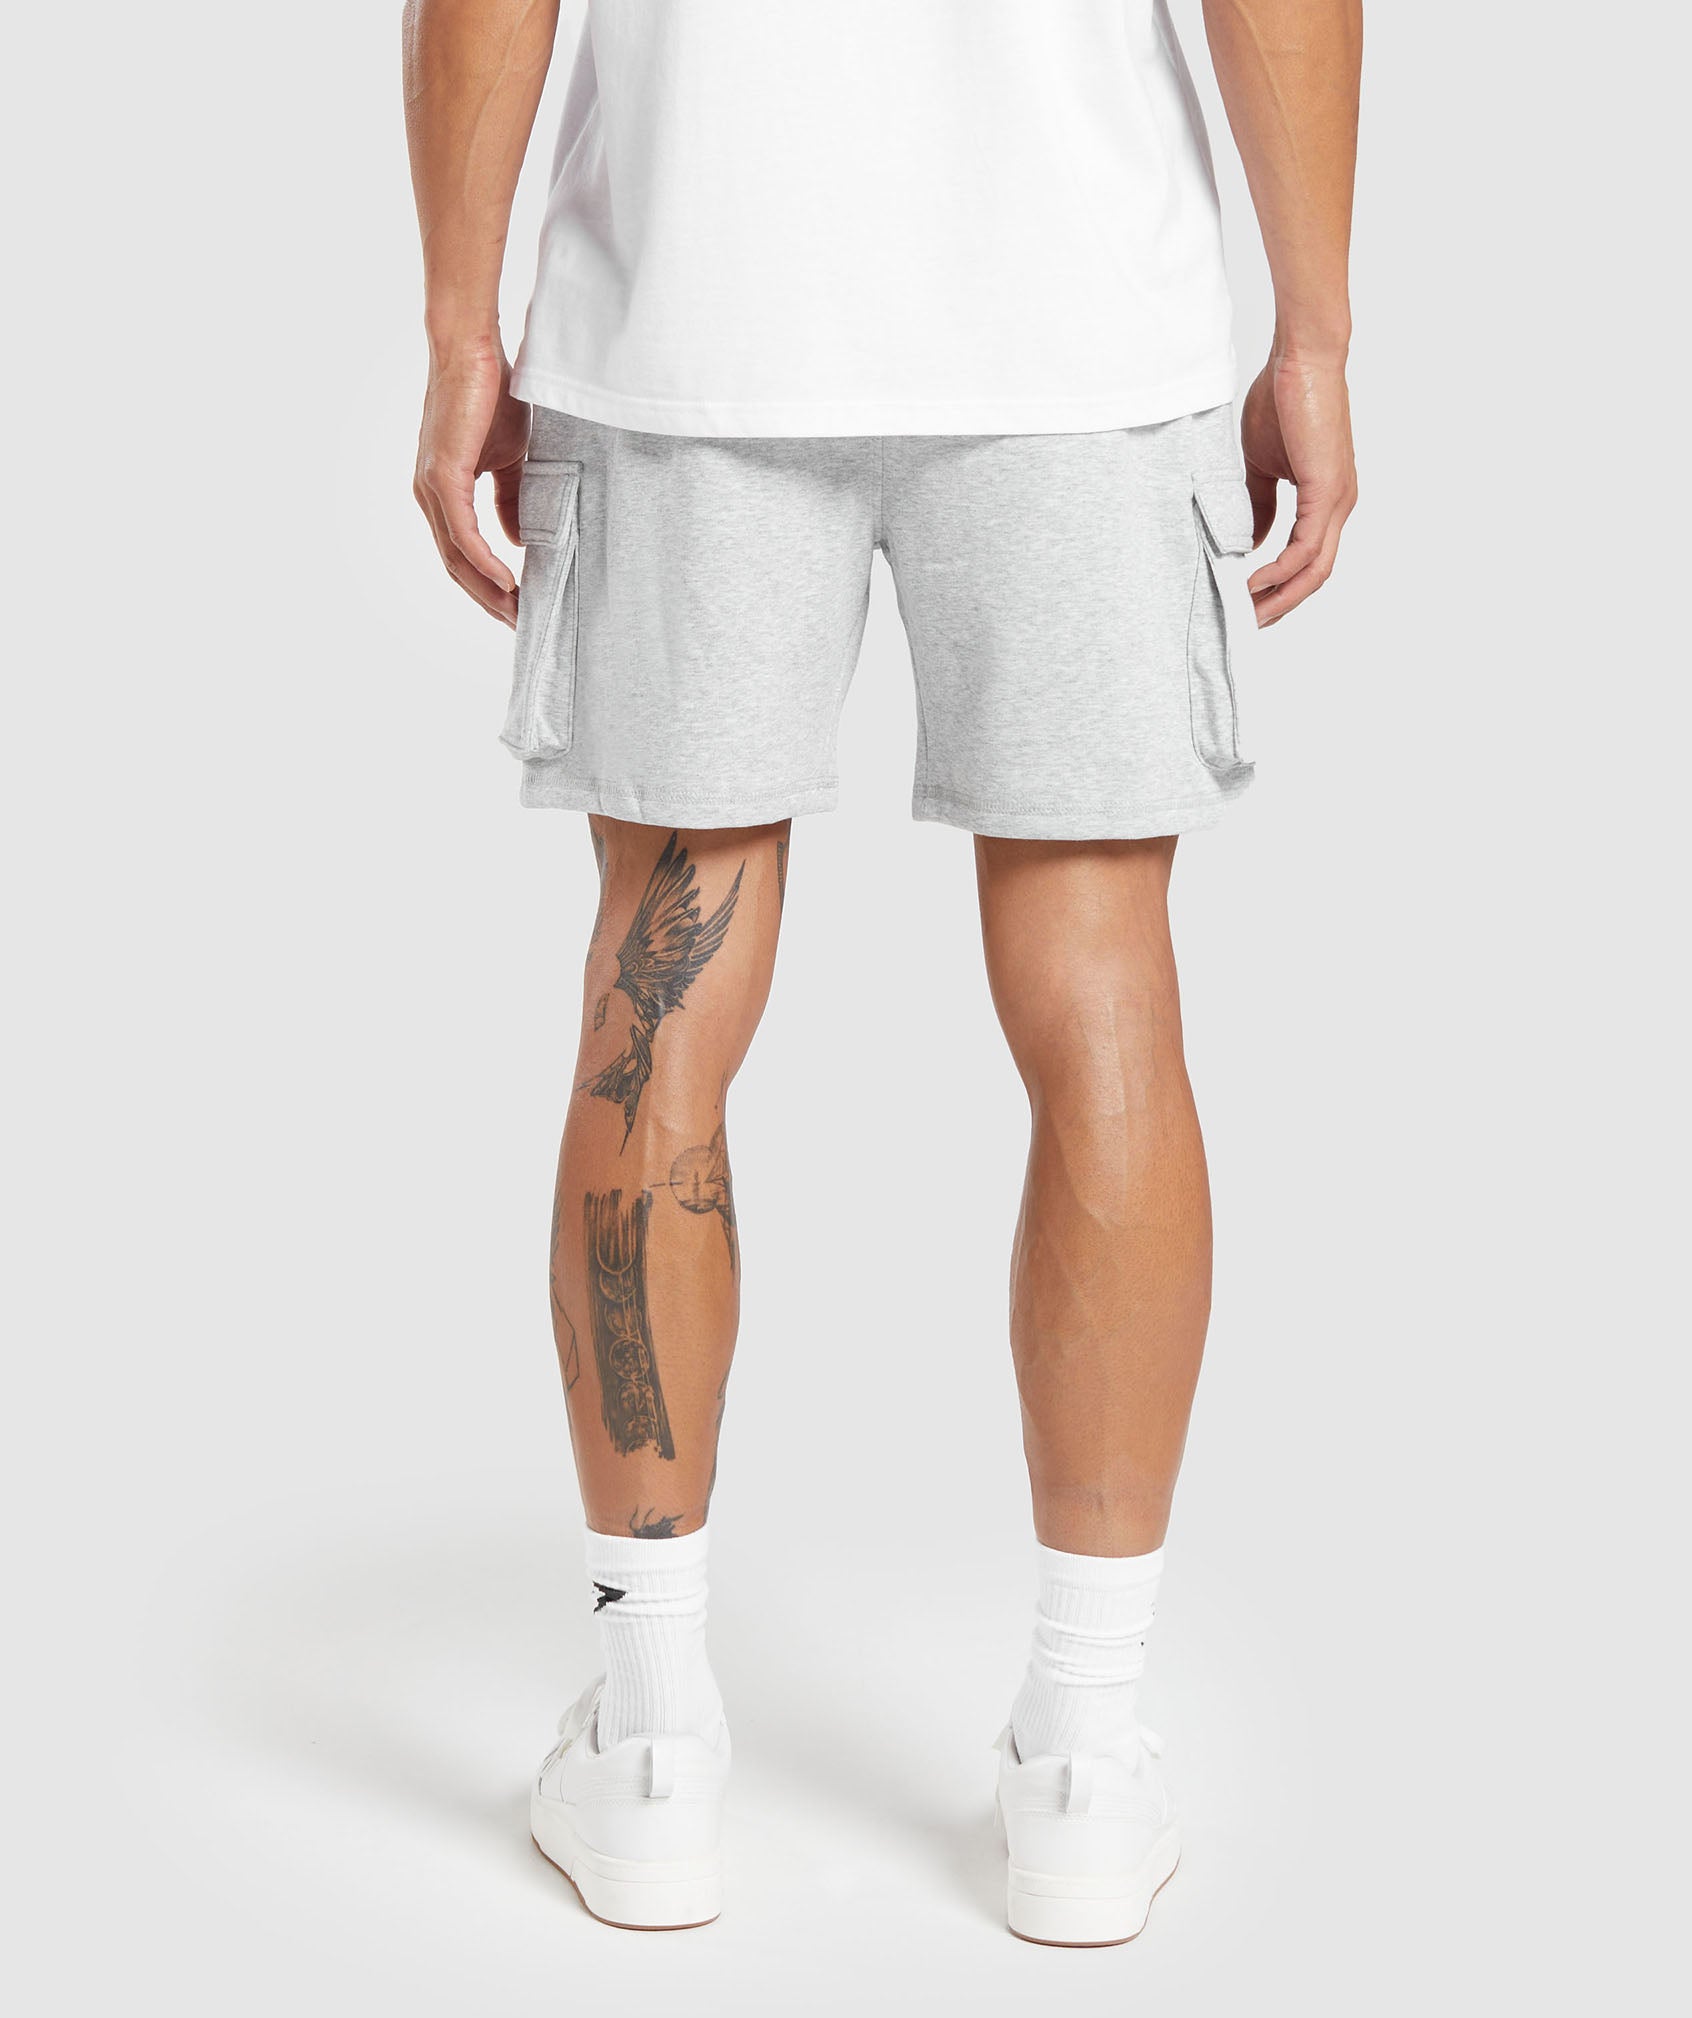 Crest Cargo Shorts in Light Grey Core Marl - view 4